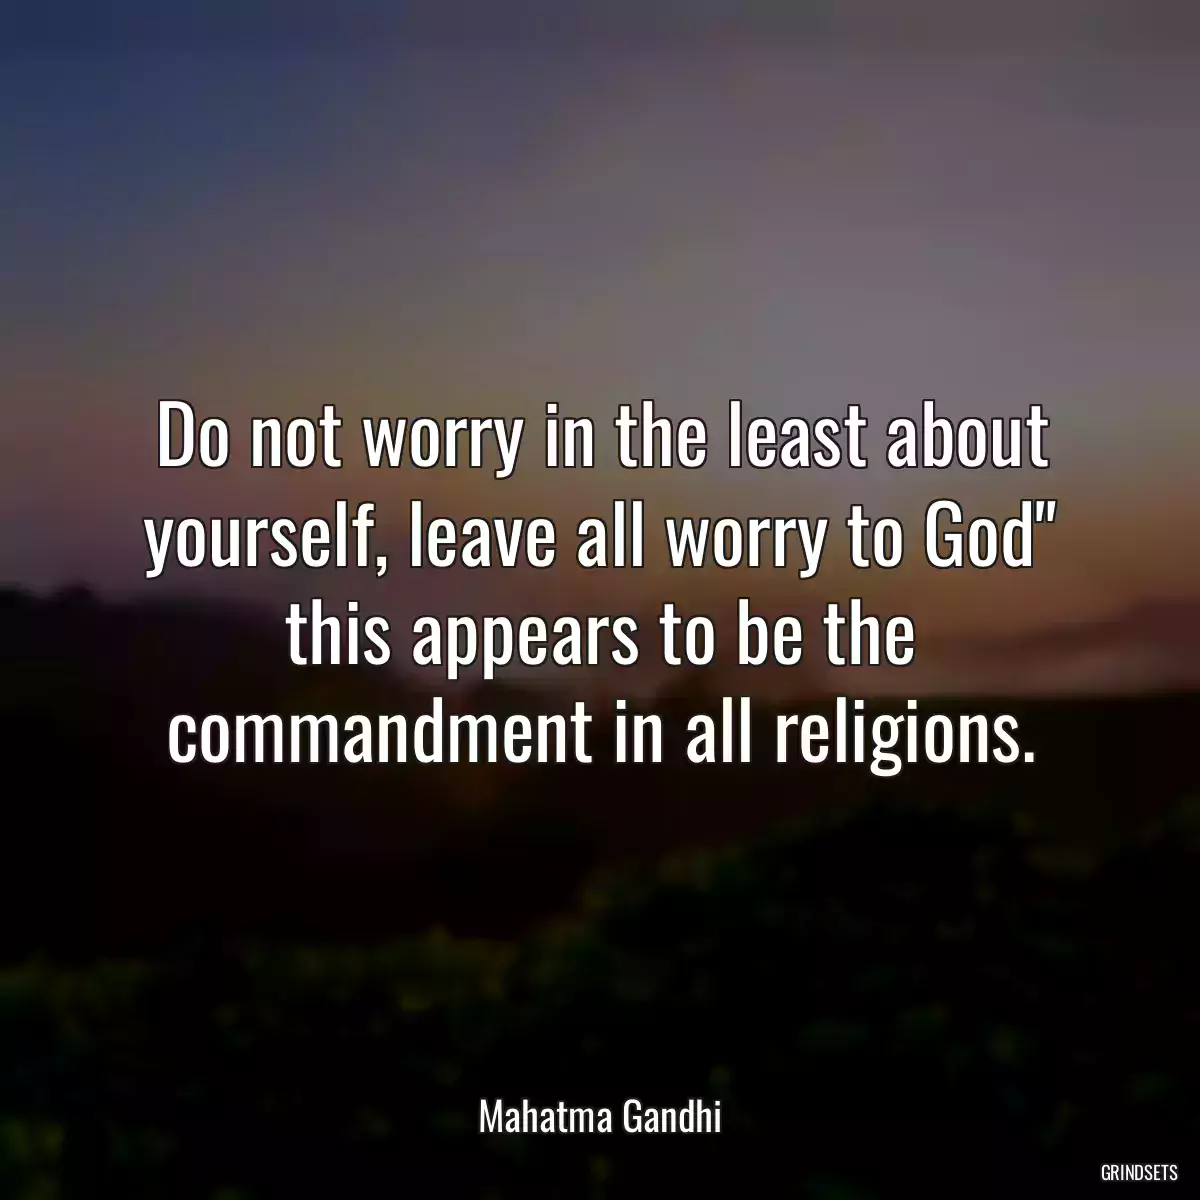 Do not worry in the least about yourself, leave all worry to God\